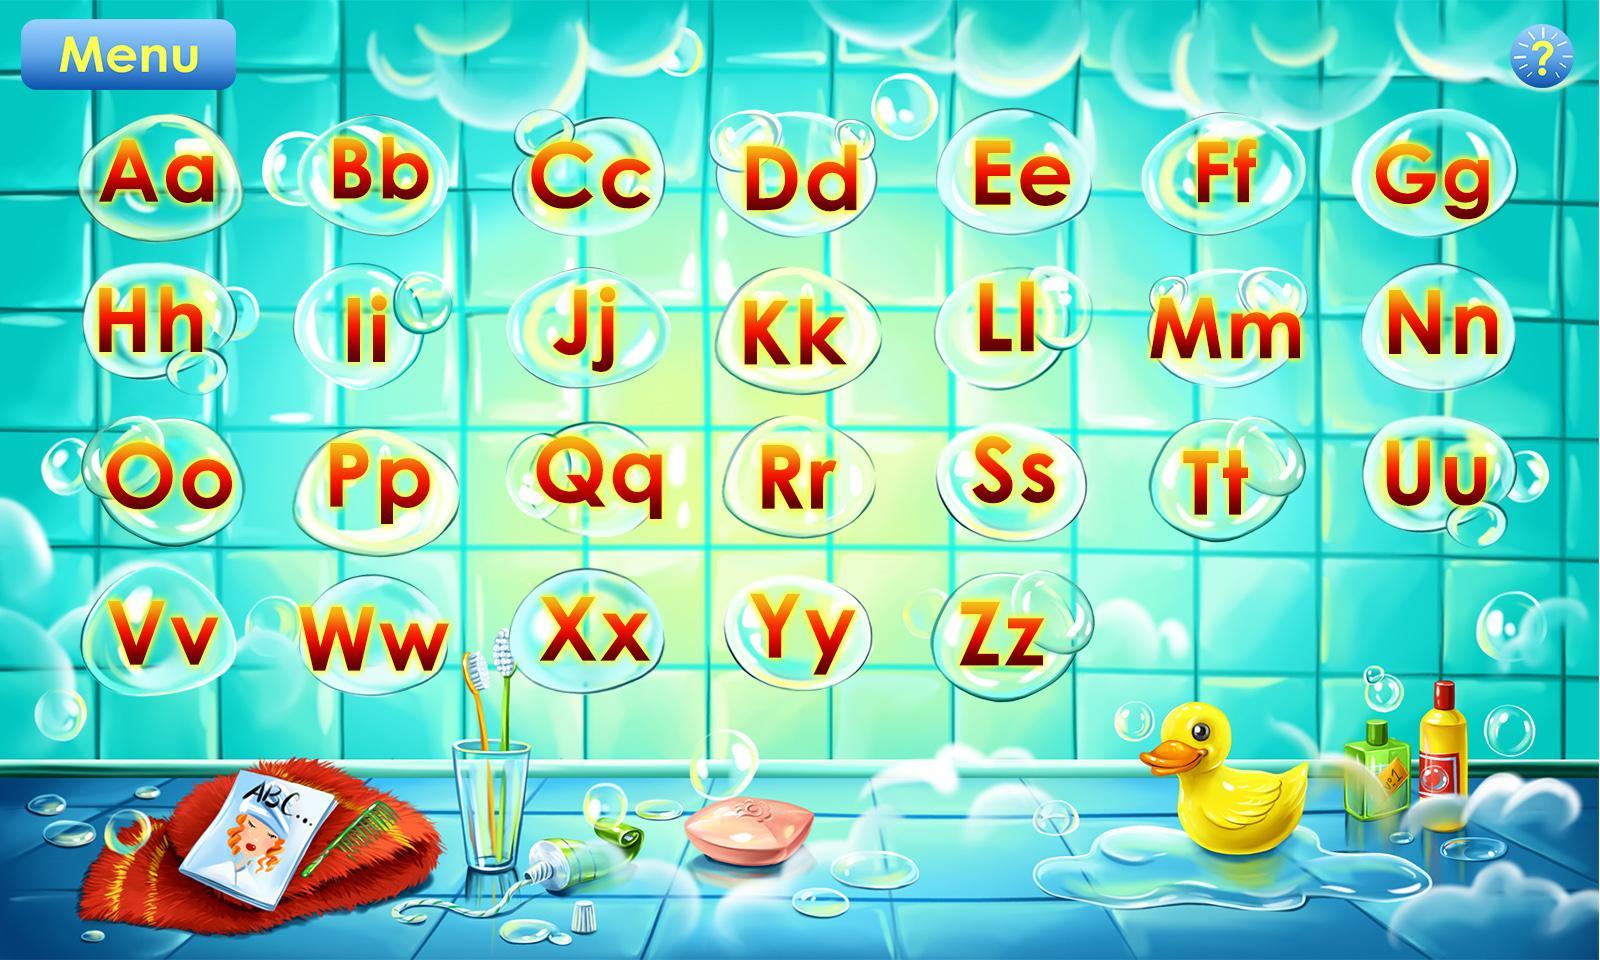 ABC Alphabet! ABCD games! Learn letters 1.5.23 Screenshot 14